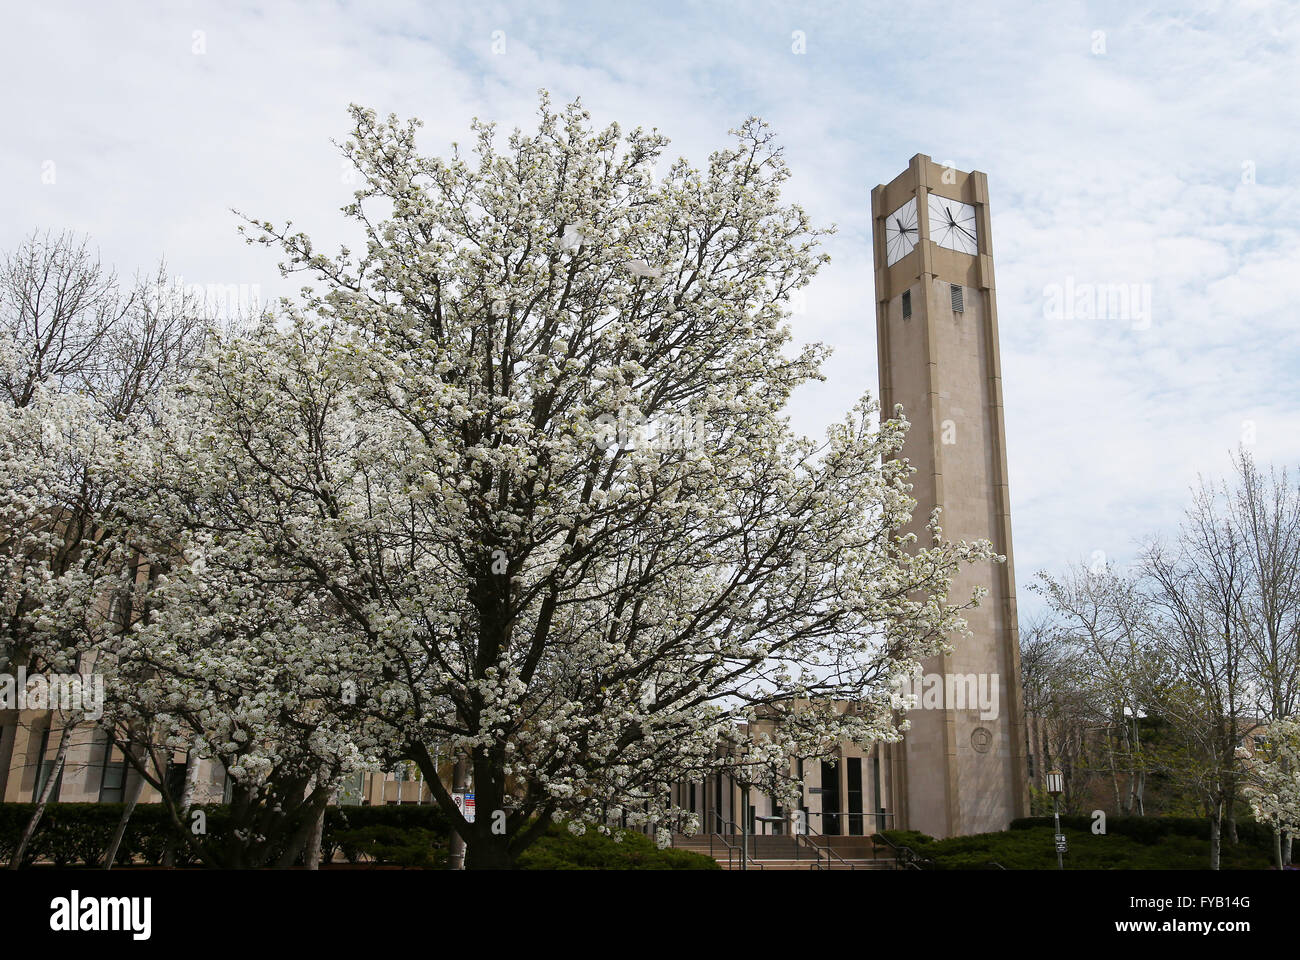 A view of the clock tower at the Rebecca Crown Center as trees bloom in the spring on the campus of Northwestern University Stock Photo